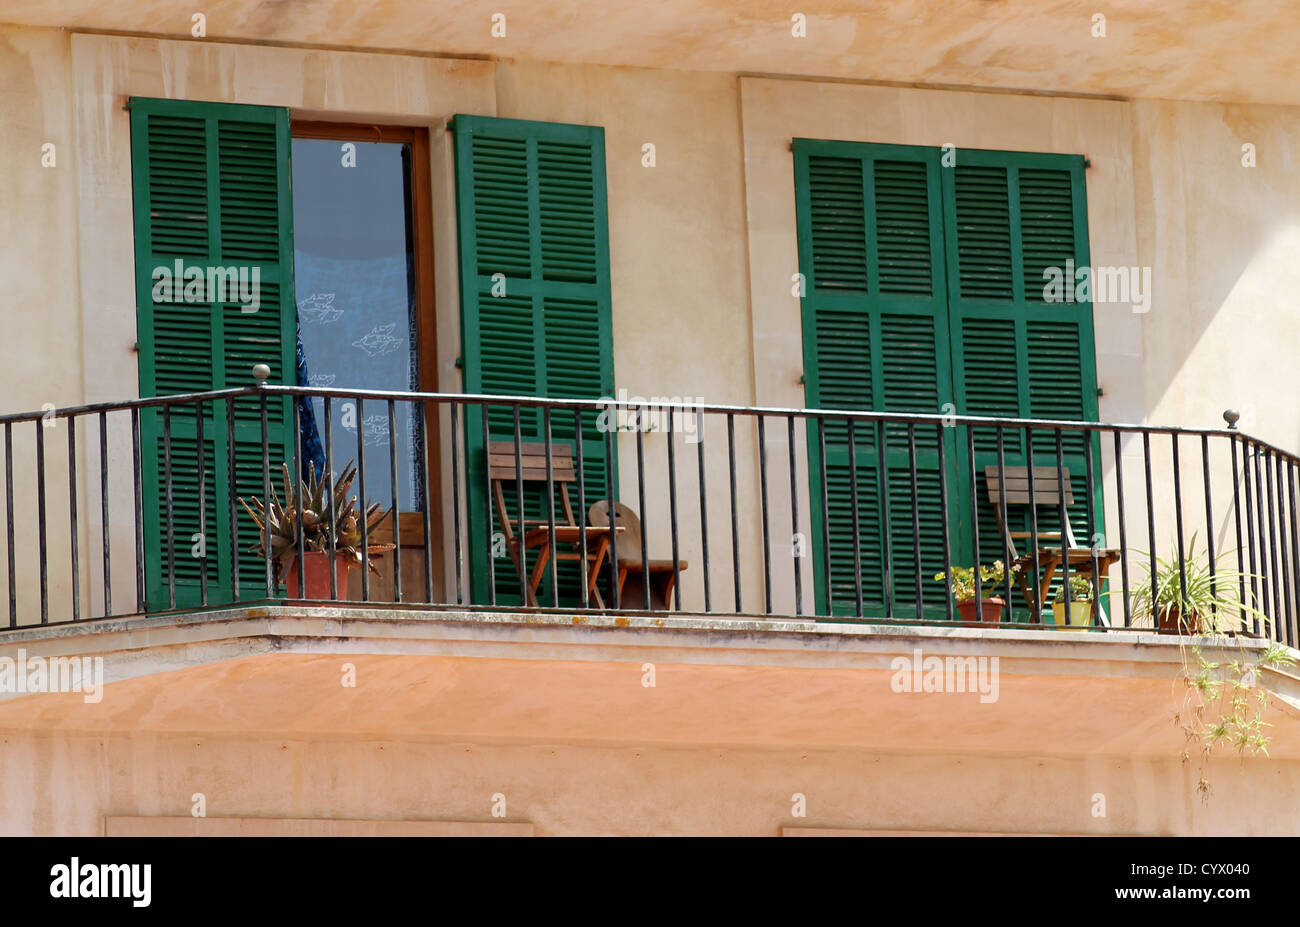 Balcony of traditional Spanish home with shutters in background. Stock Photo